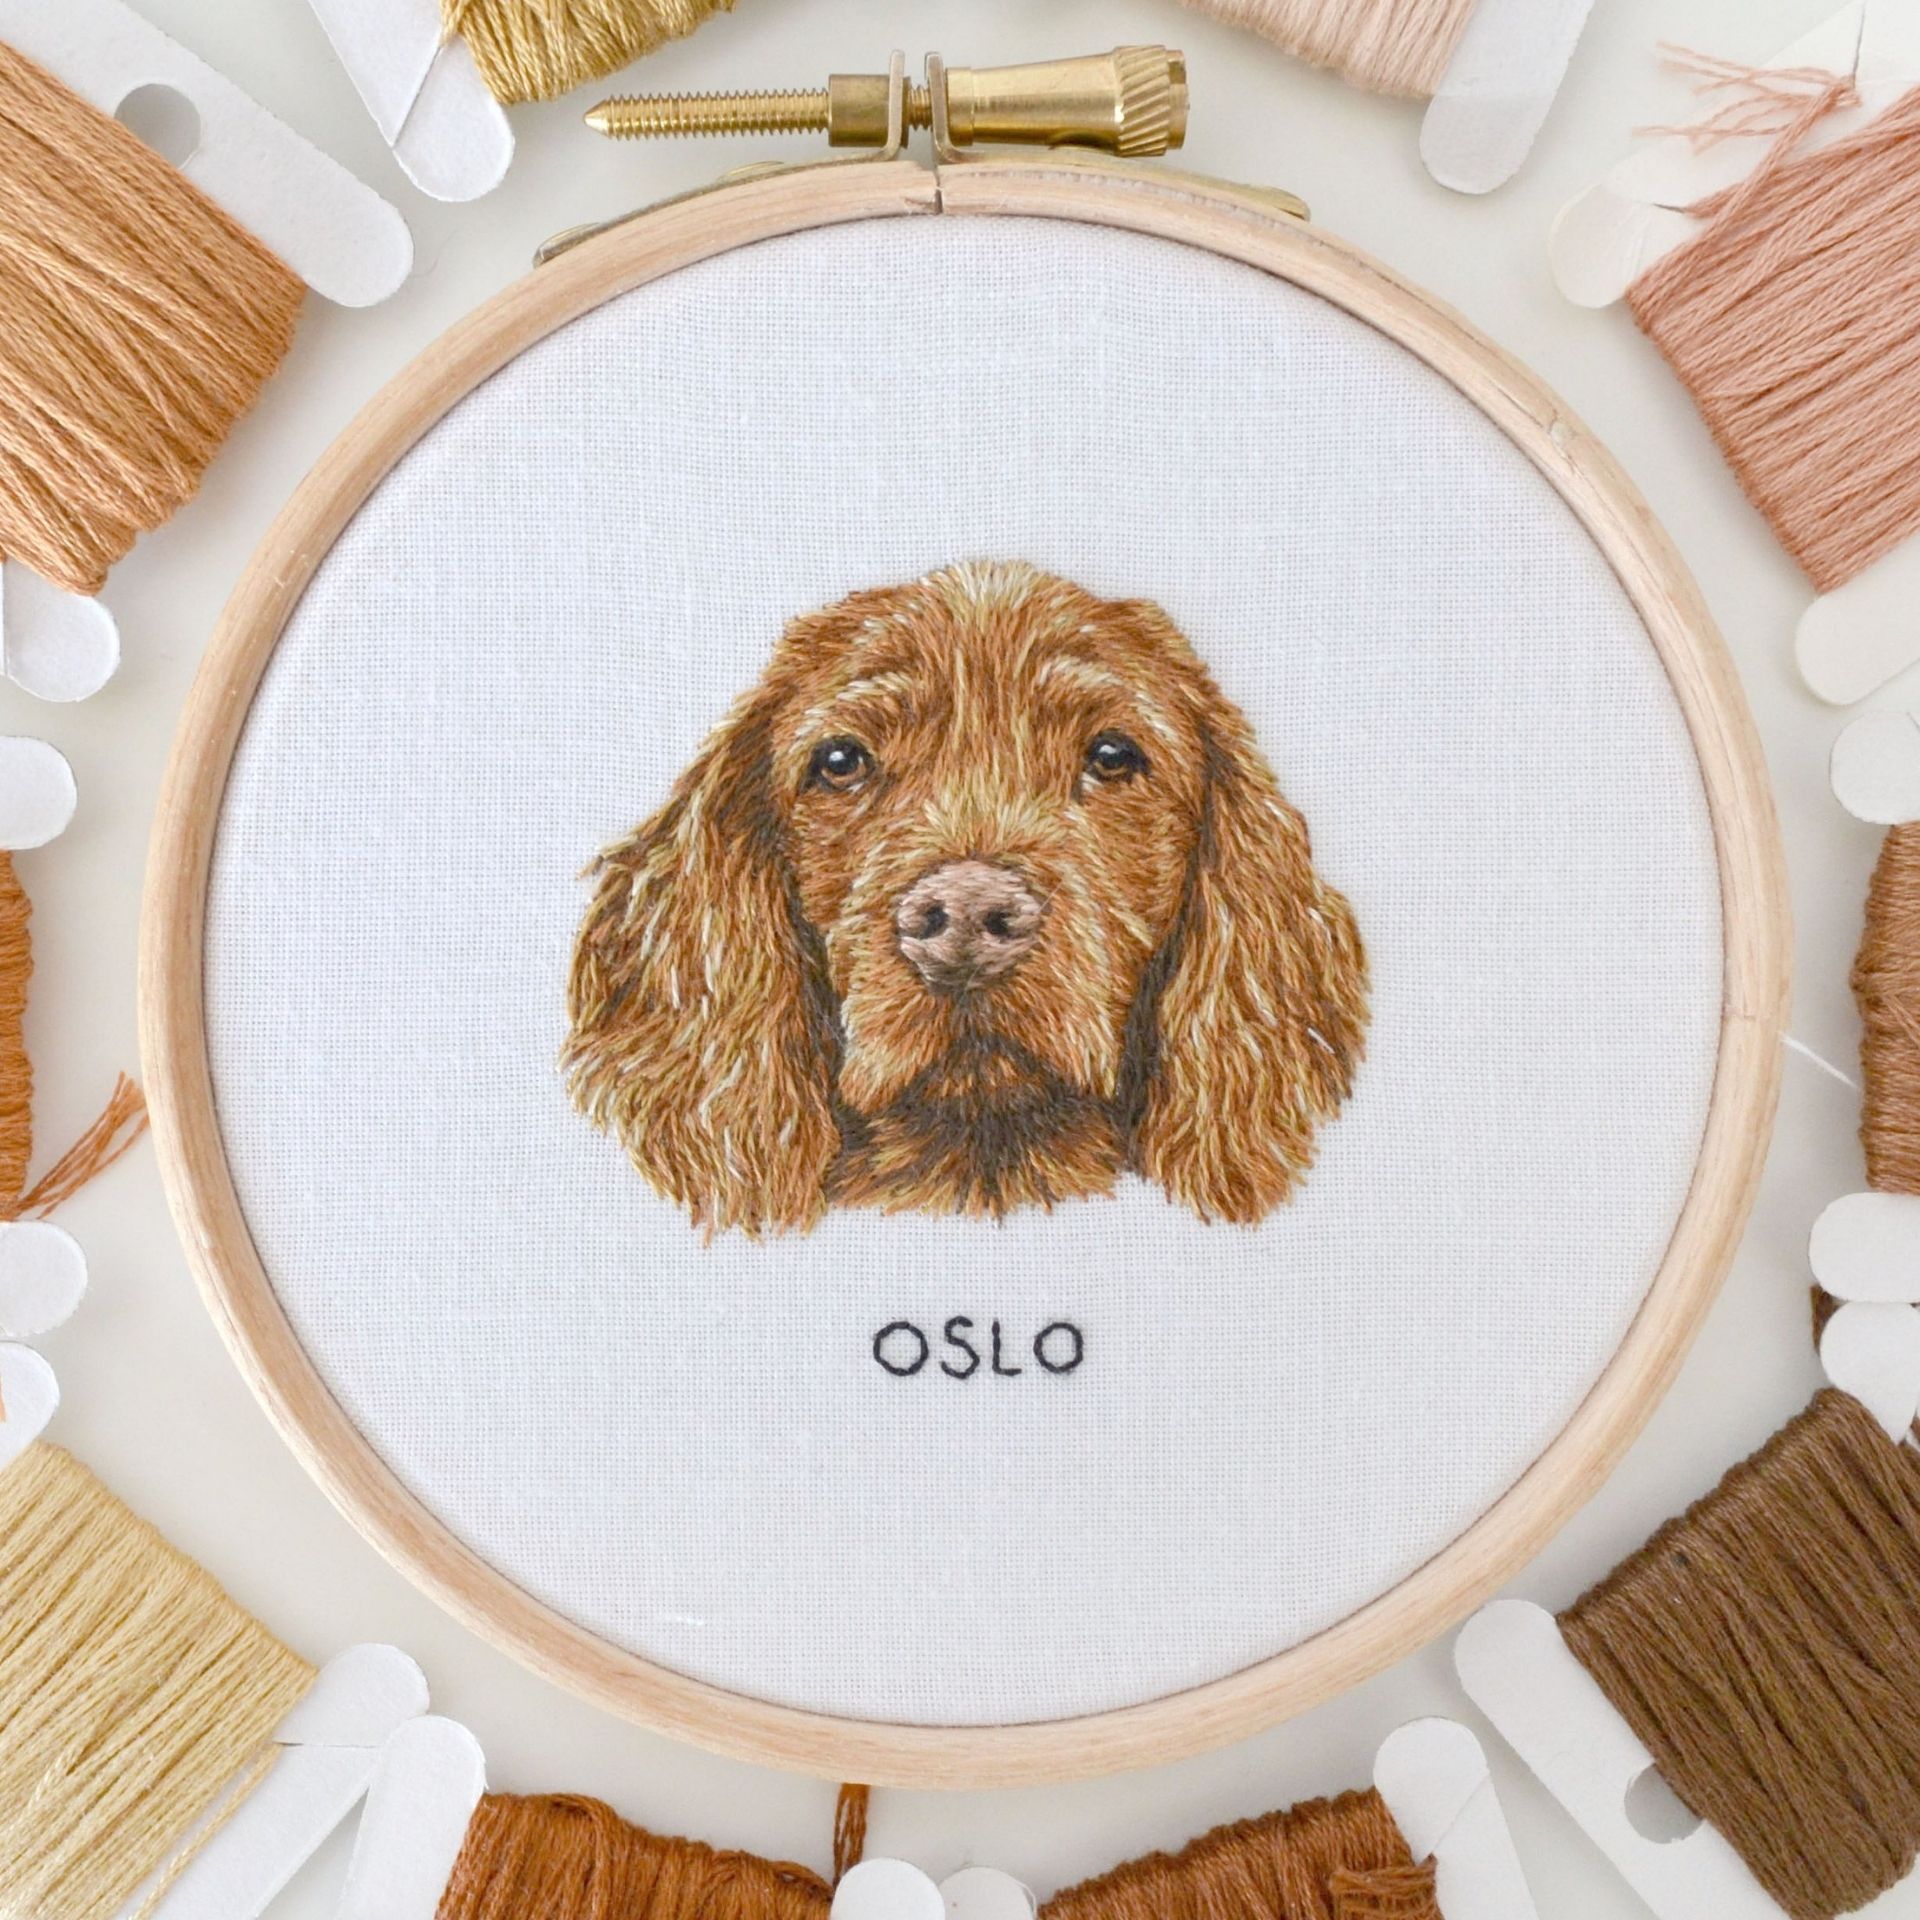 embroidered portrait of a brown dog with the name Oslo